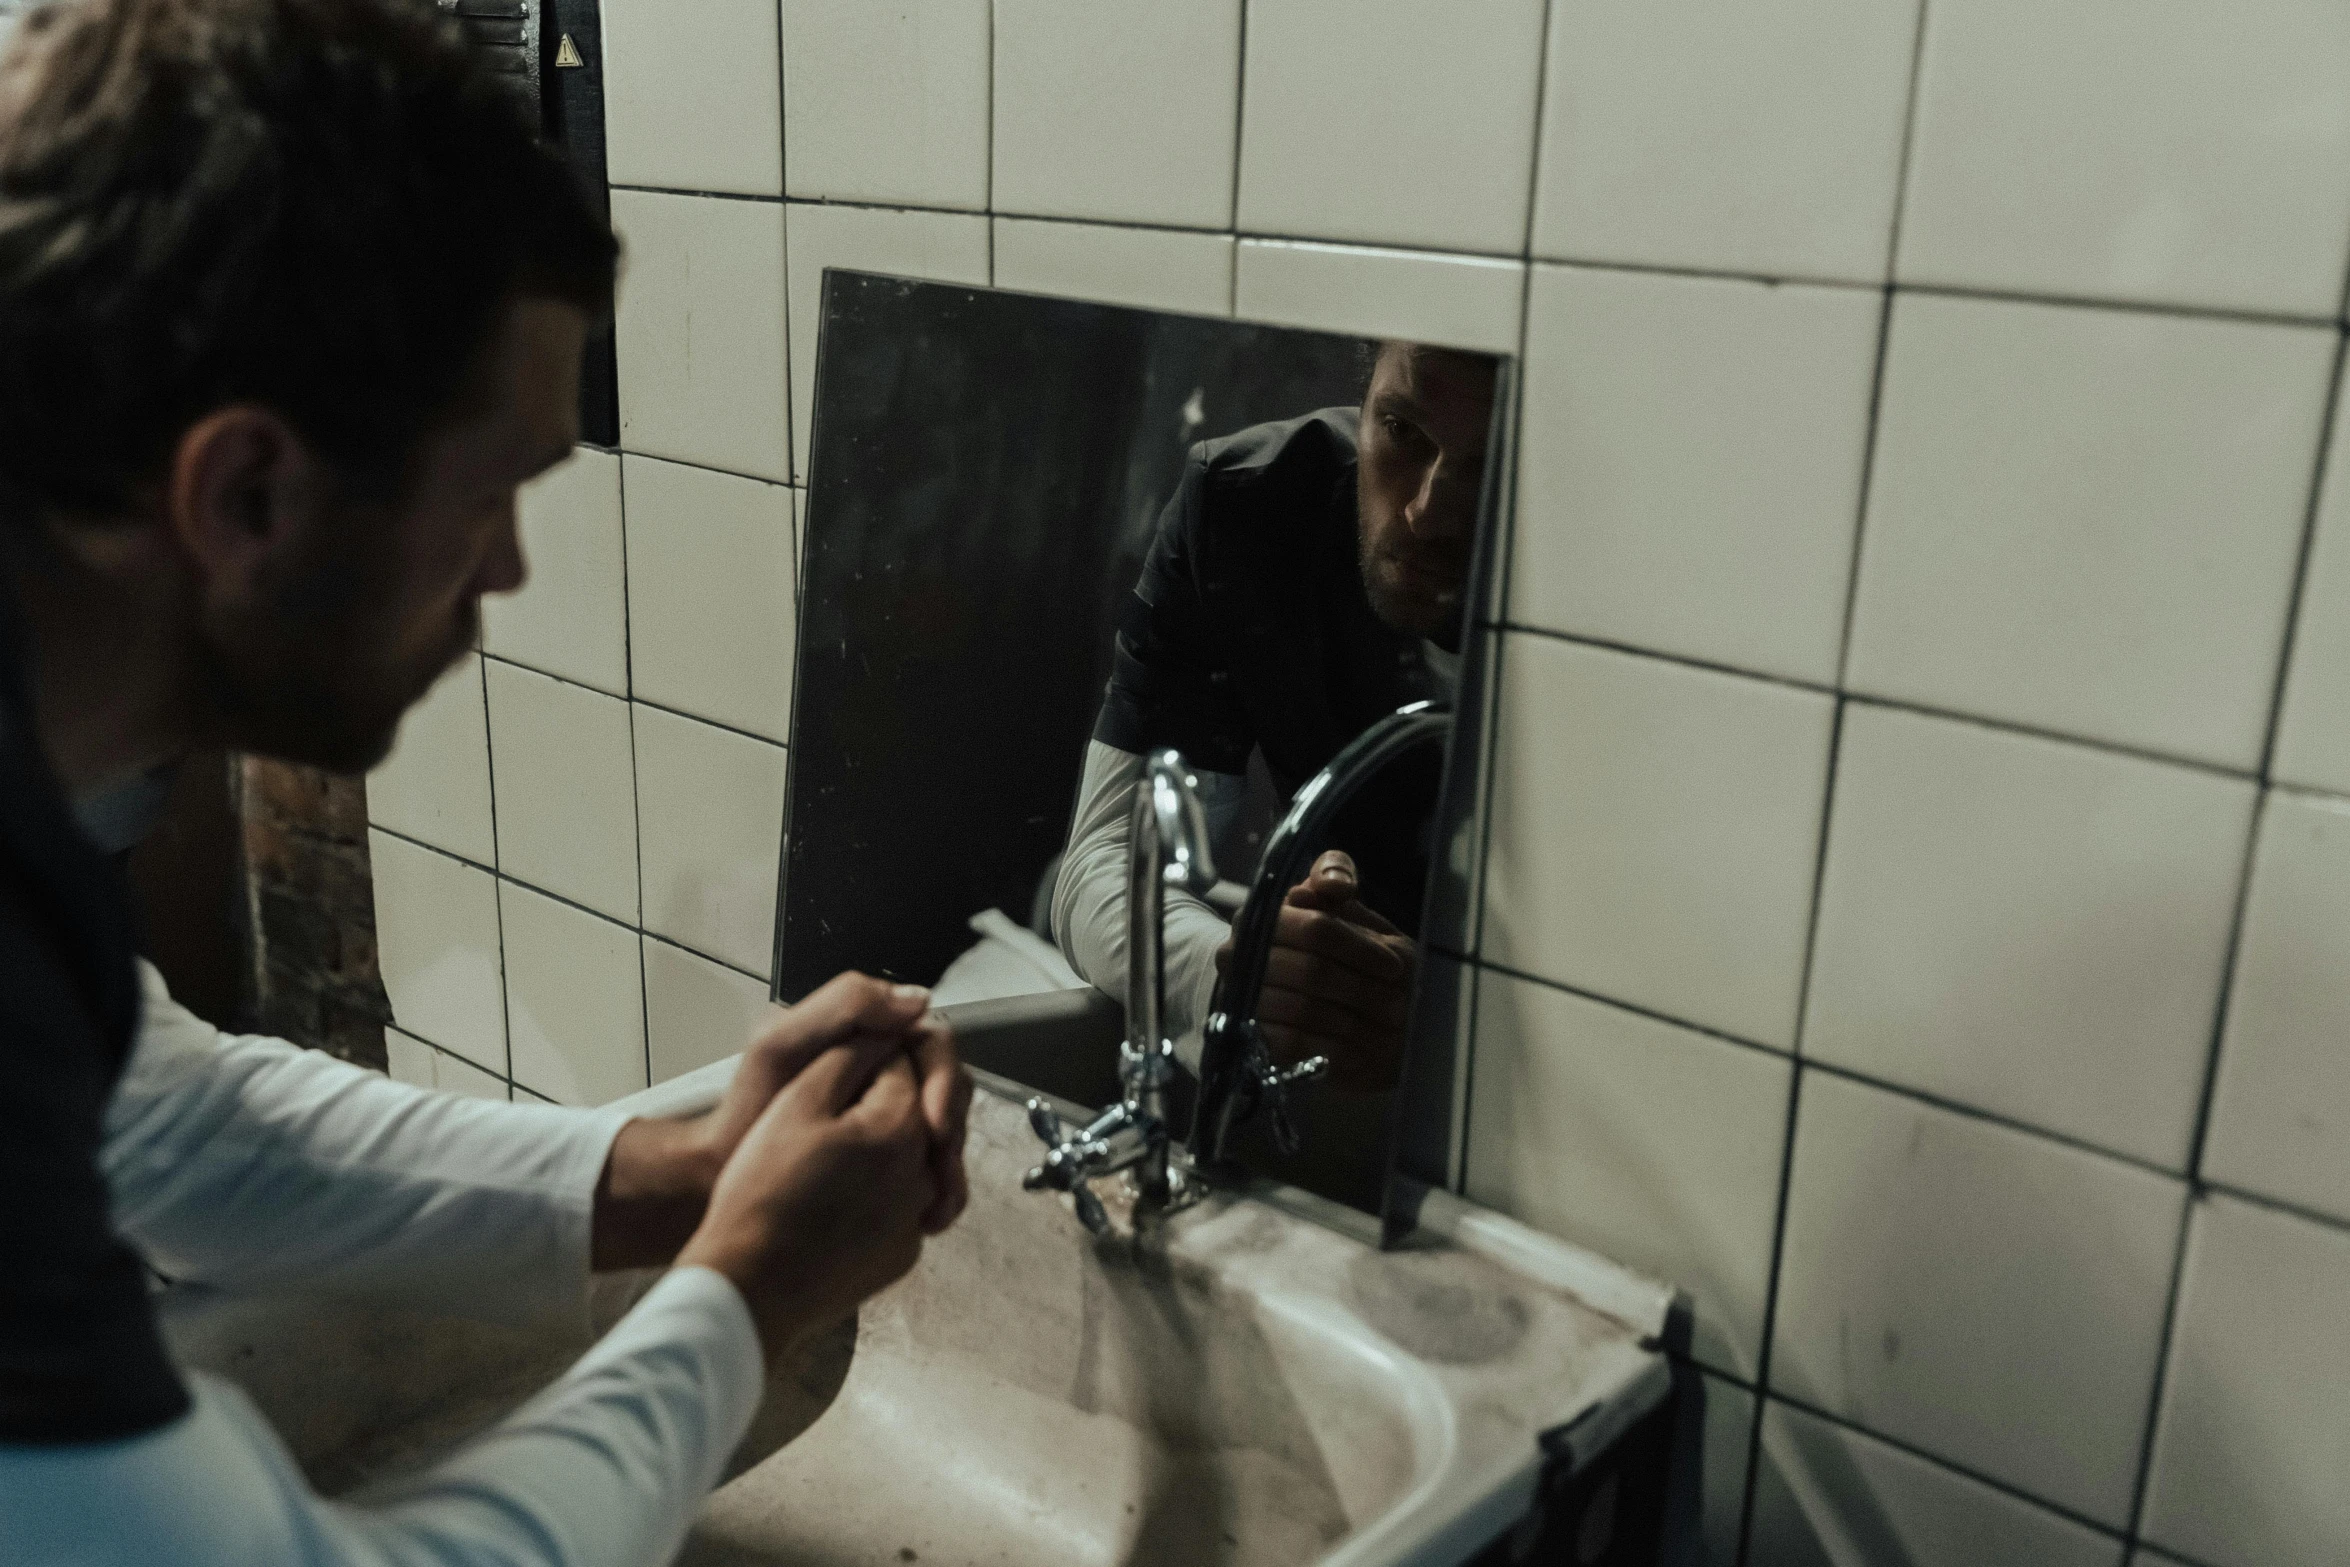 a man brushing his teeth in front of a mirror, by Elsa Bleda, hyperrealism, still from the movie saw, taps with running water, low quality photo, worksafe. cinematic